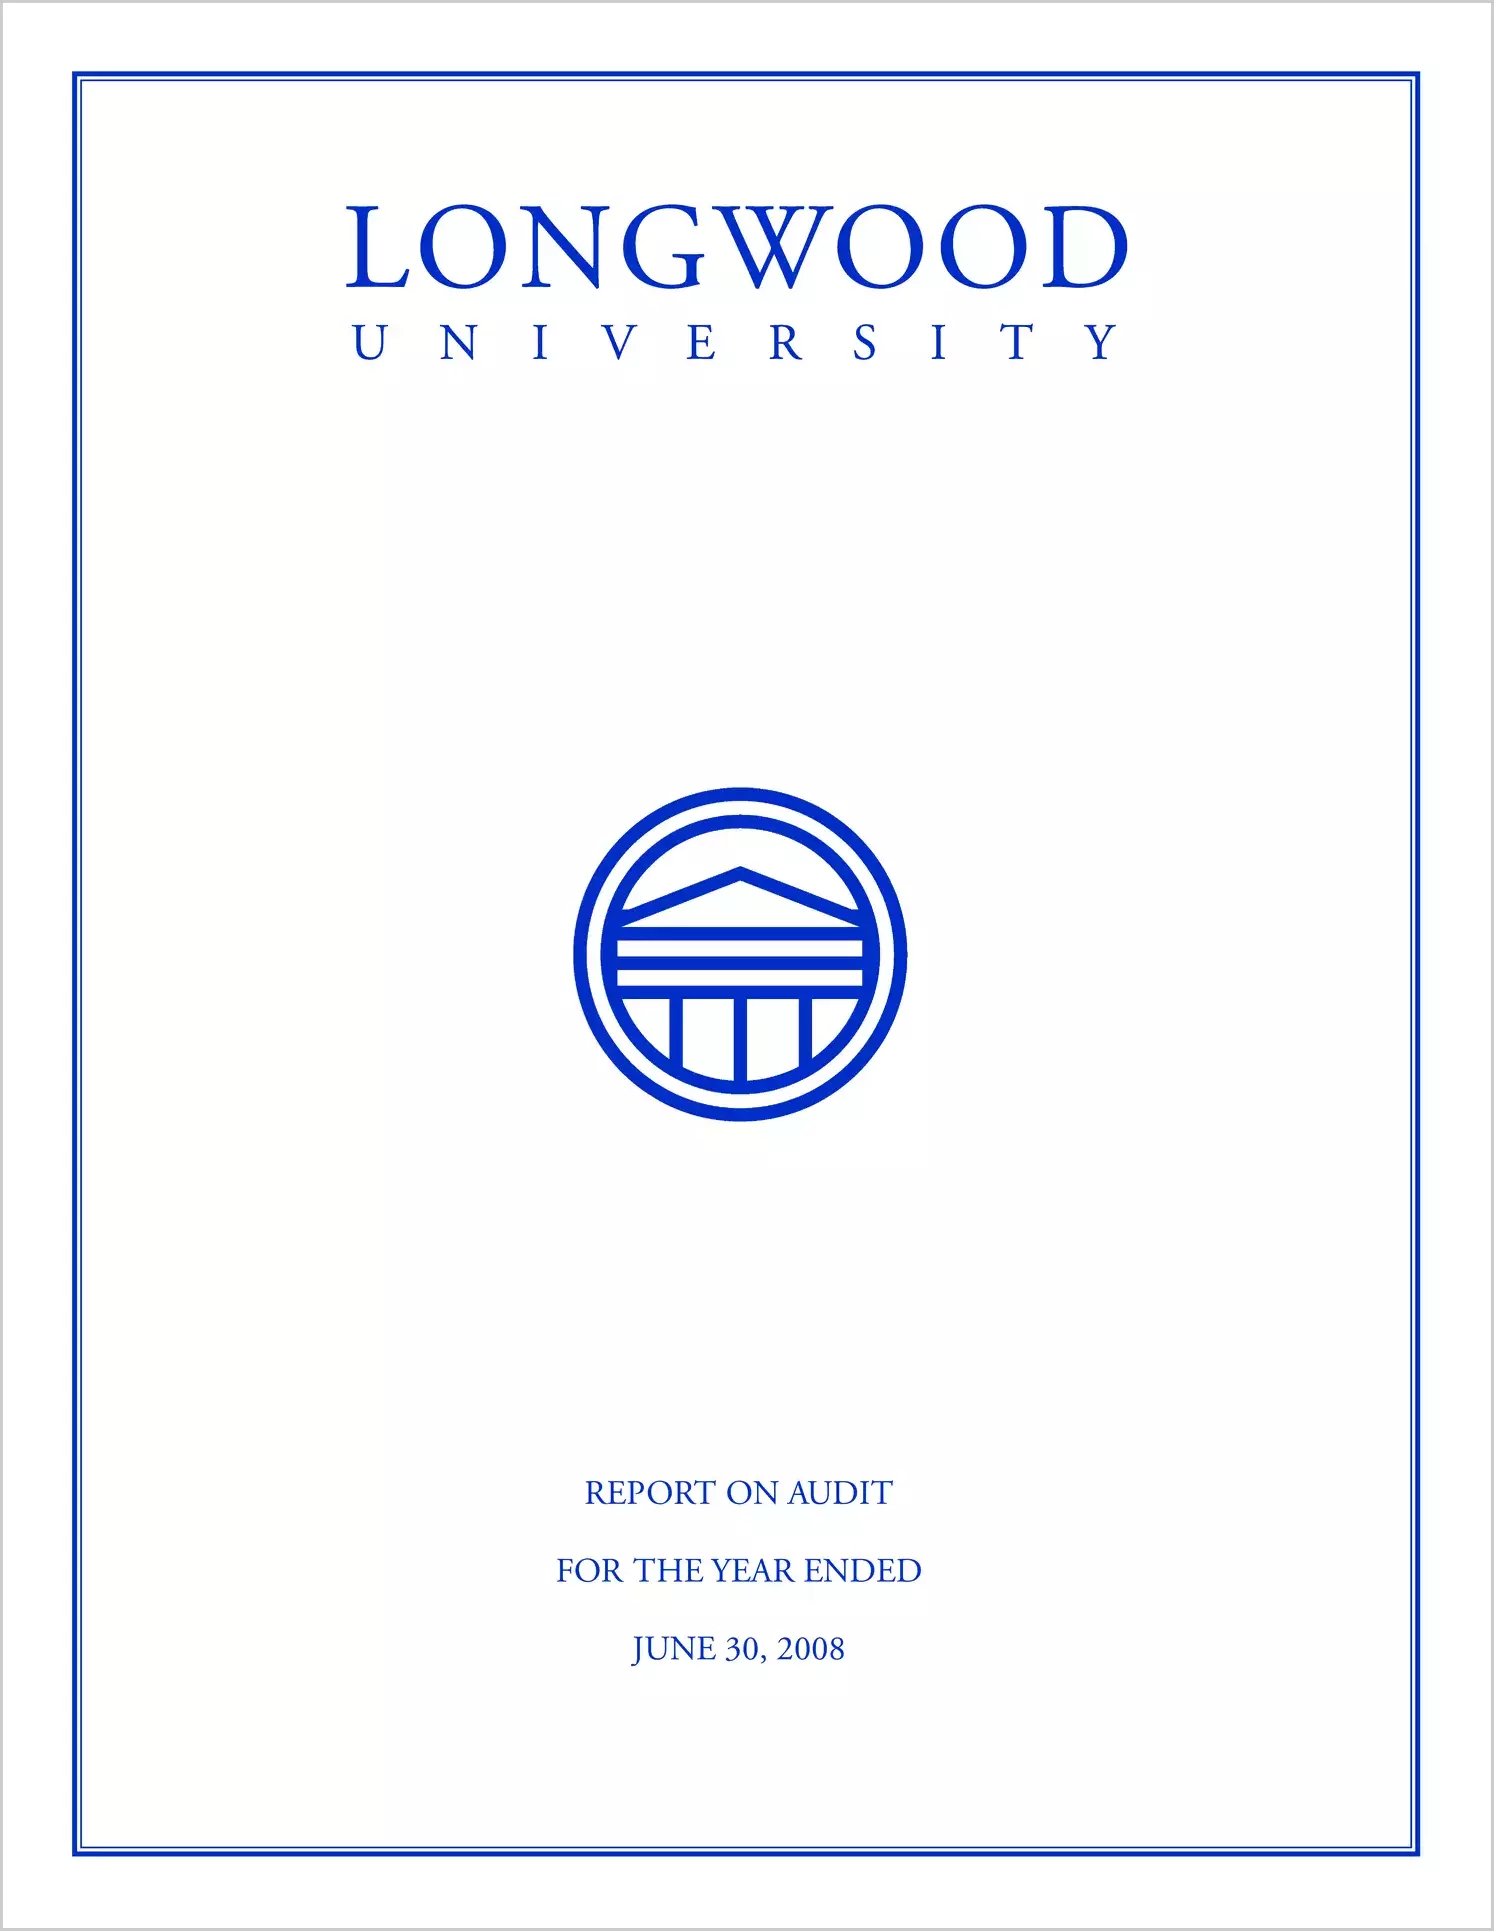 Longwood University Financial Statements report on audit for the year ended June 30, 2008